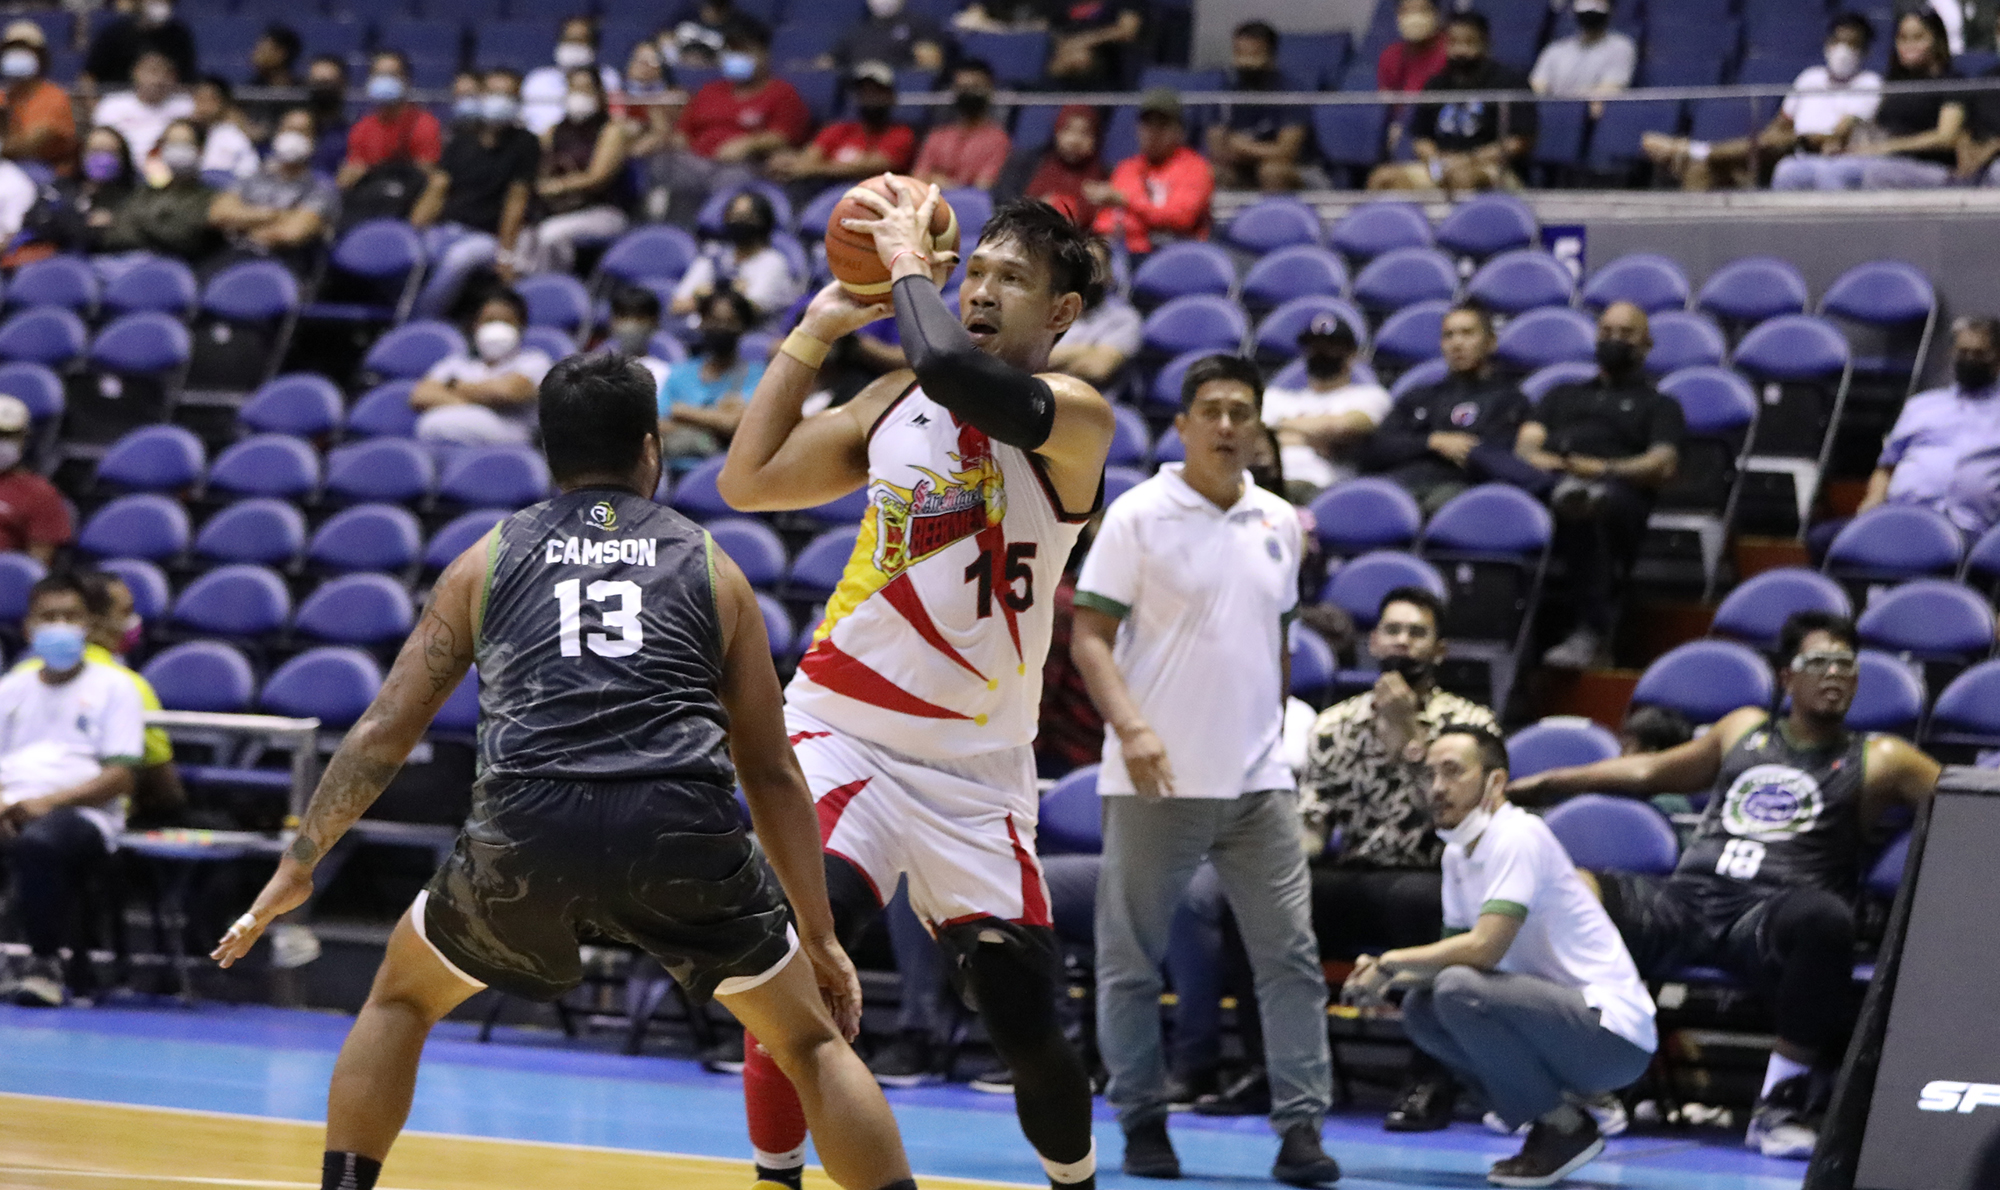 Jun Mar Fajardo with another spectacular performance for San Miguel.